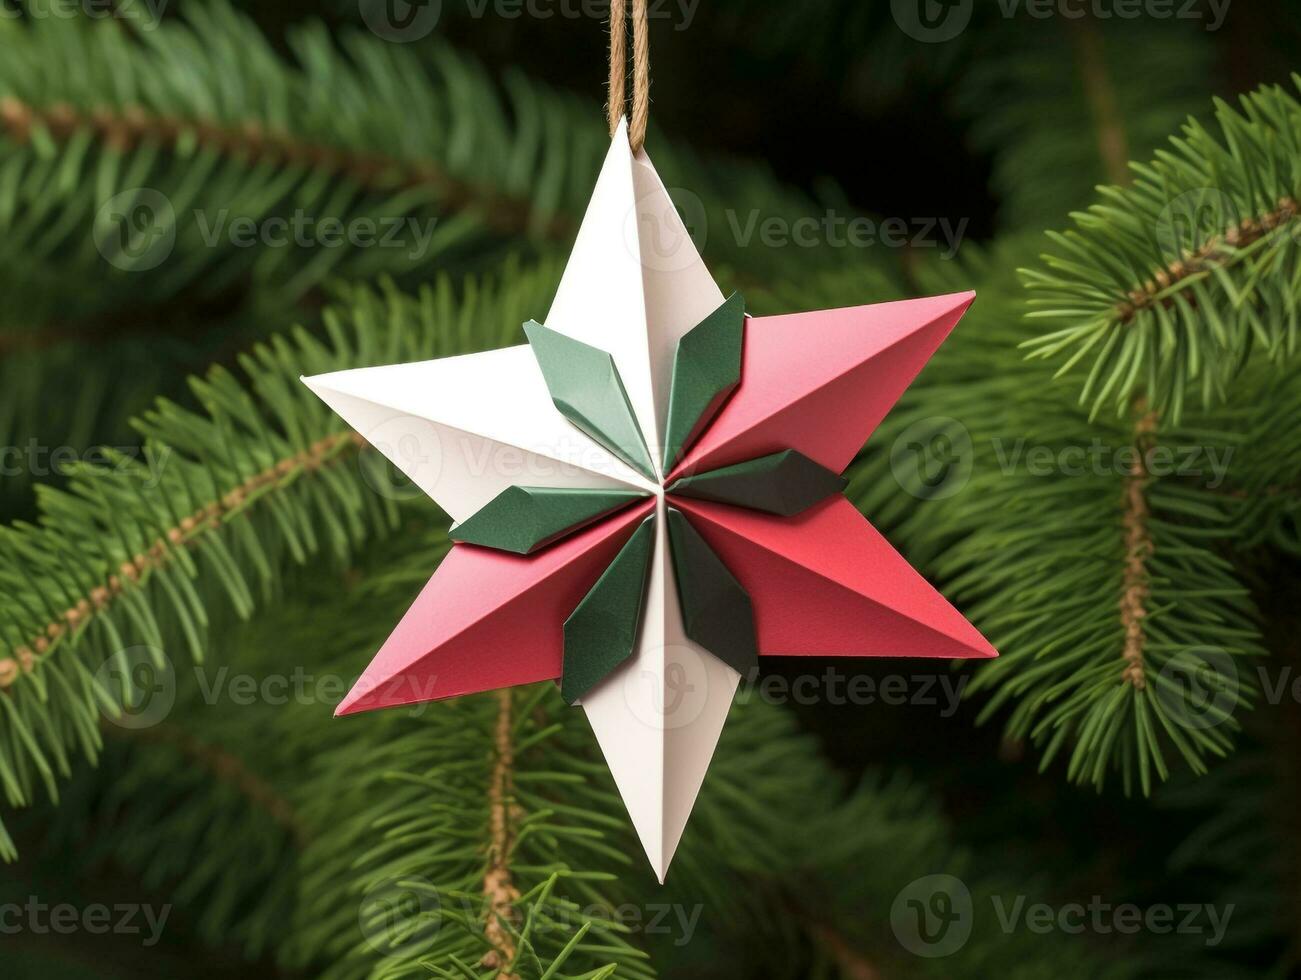 An ornament of a star hanging in the tree, christmas image, photorealistic illustration photo